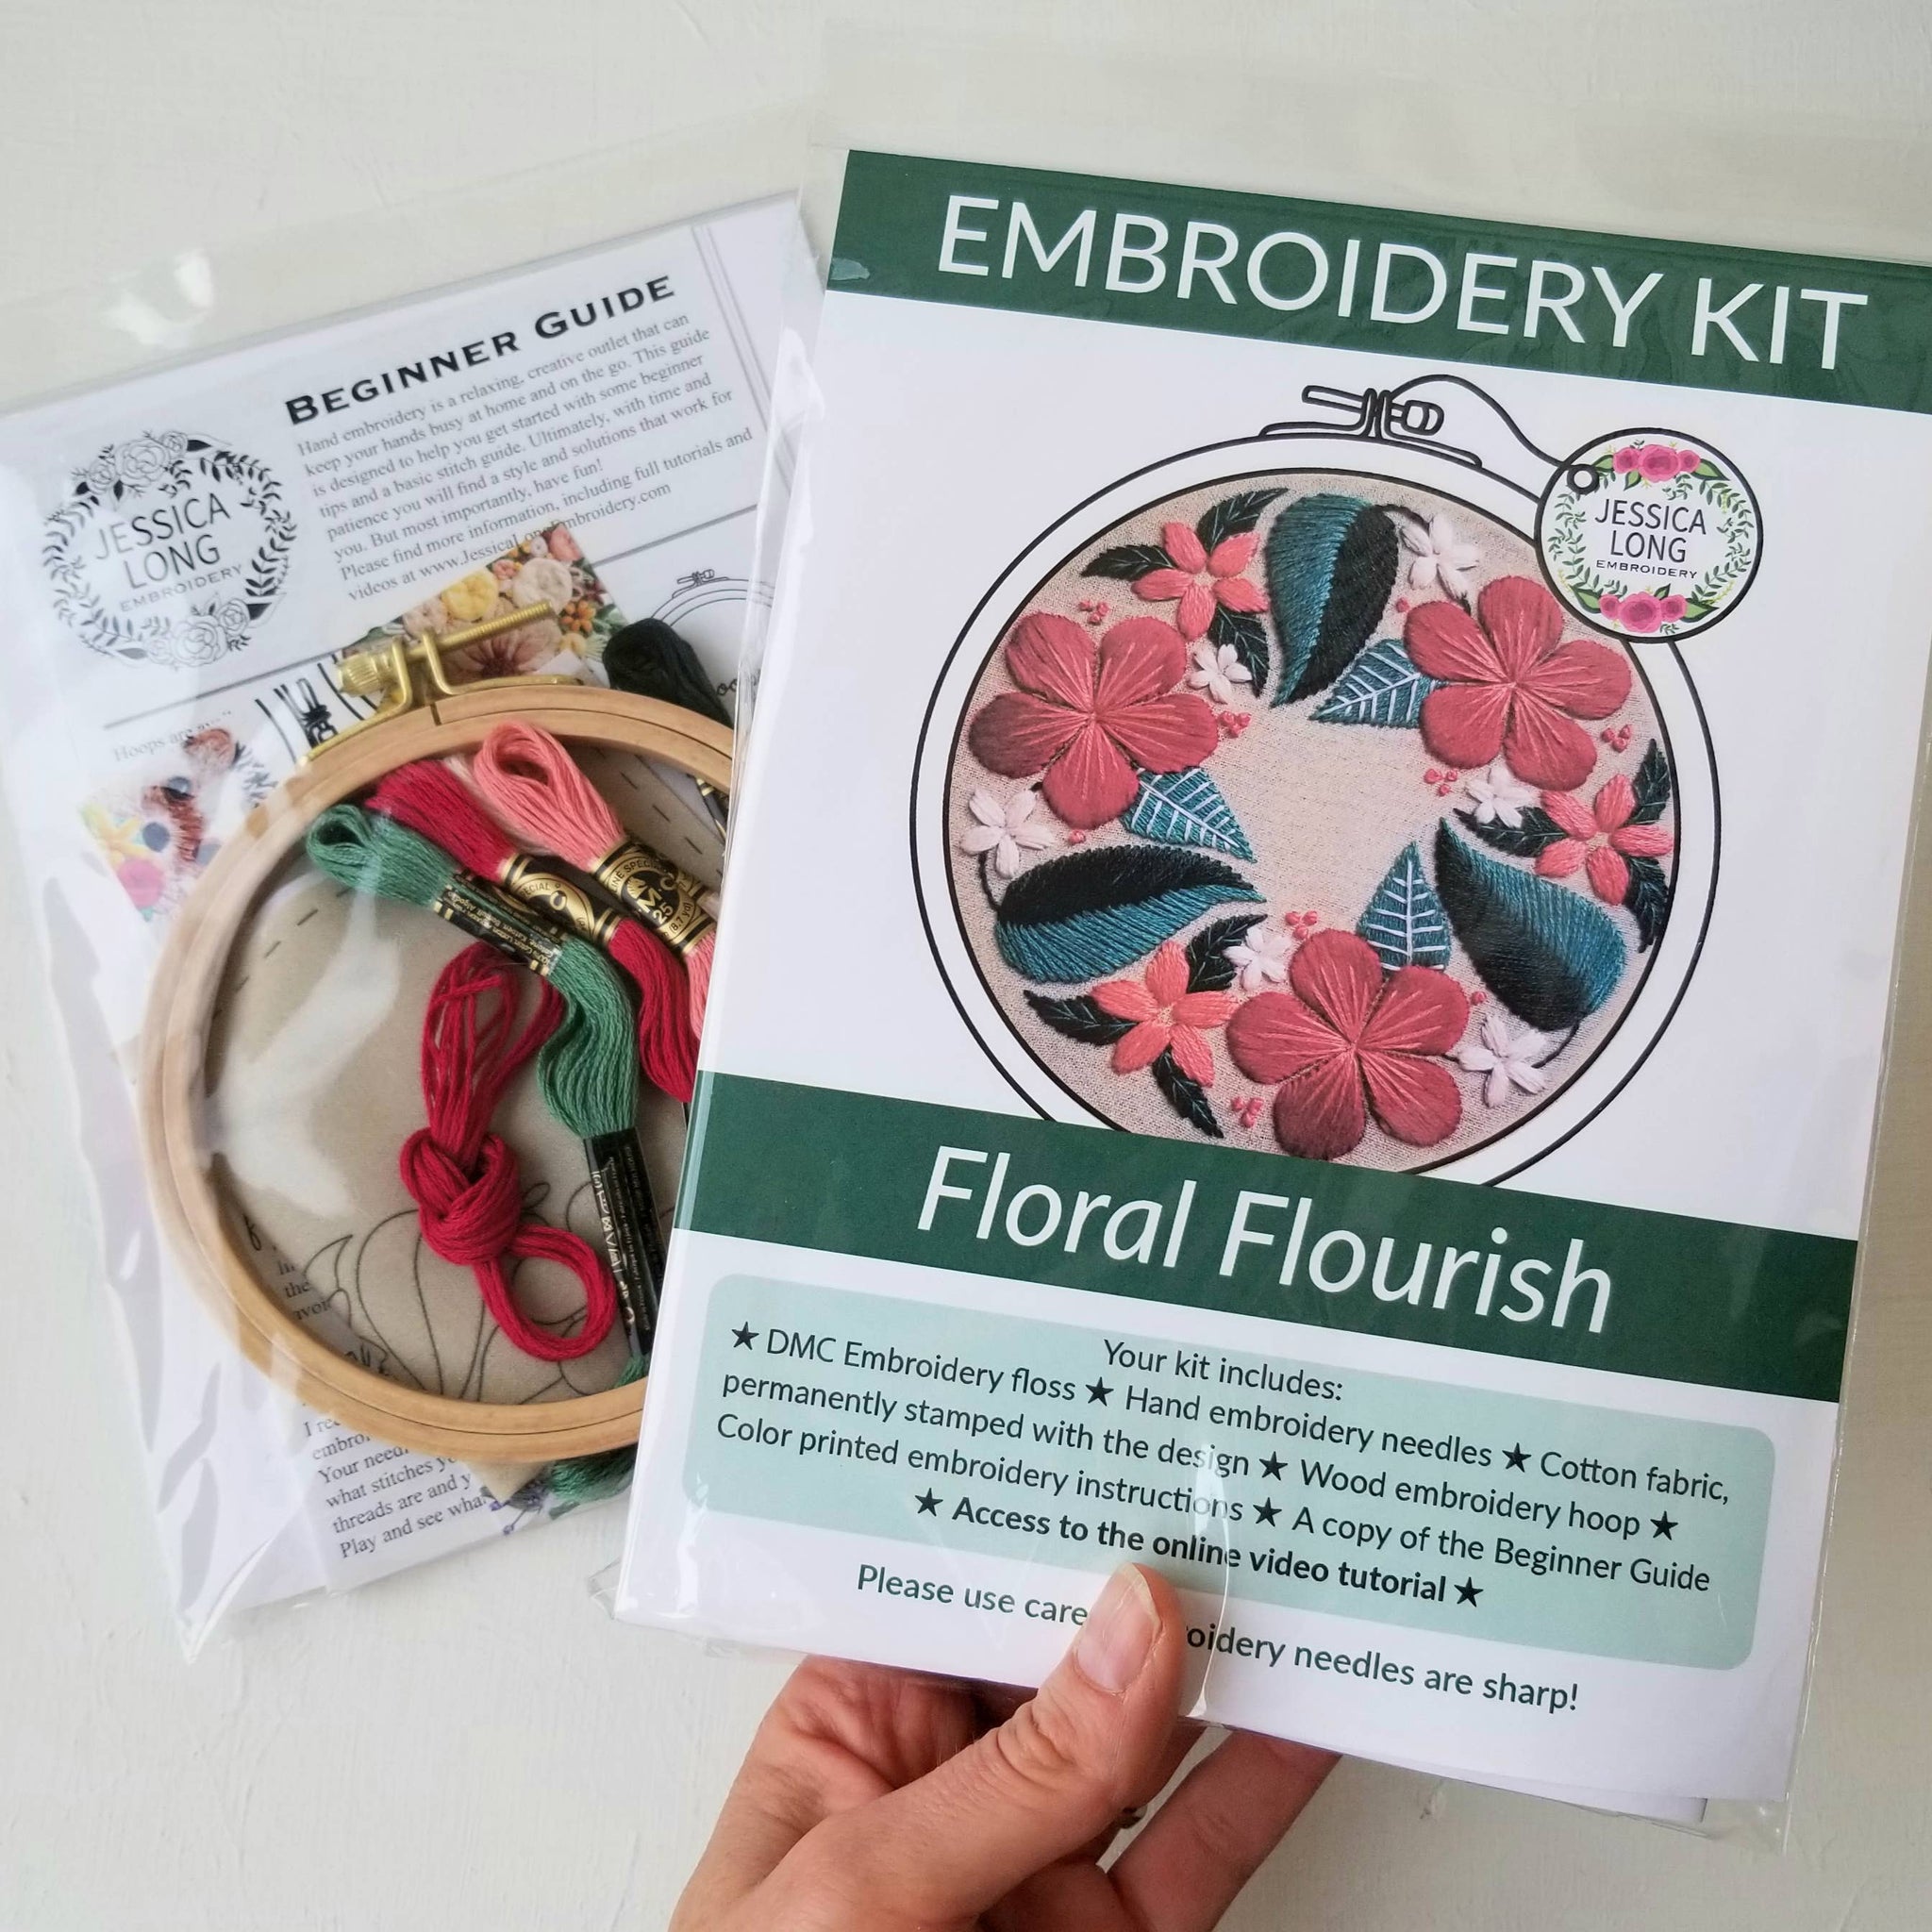 Hand Embroidery Kit - Beginner Learn Embroidery Kit with Video